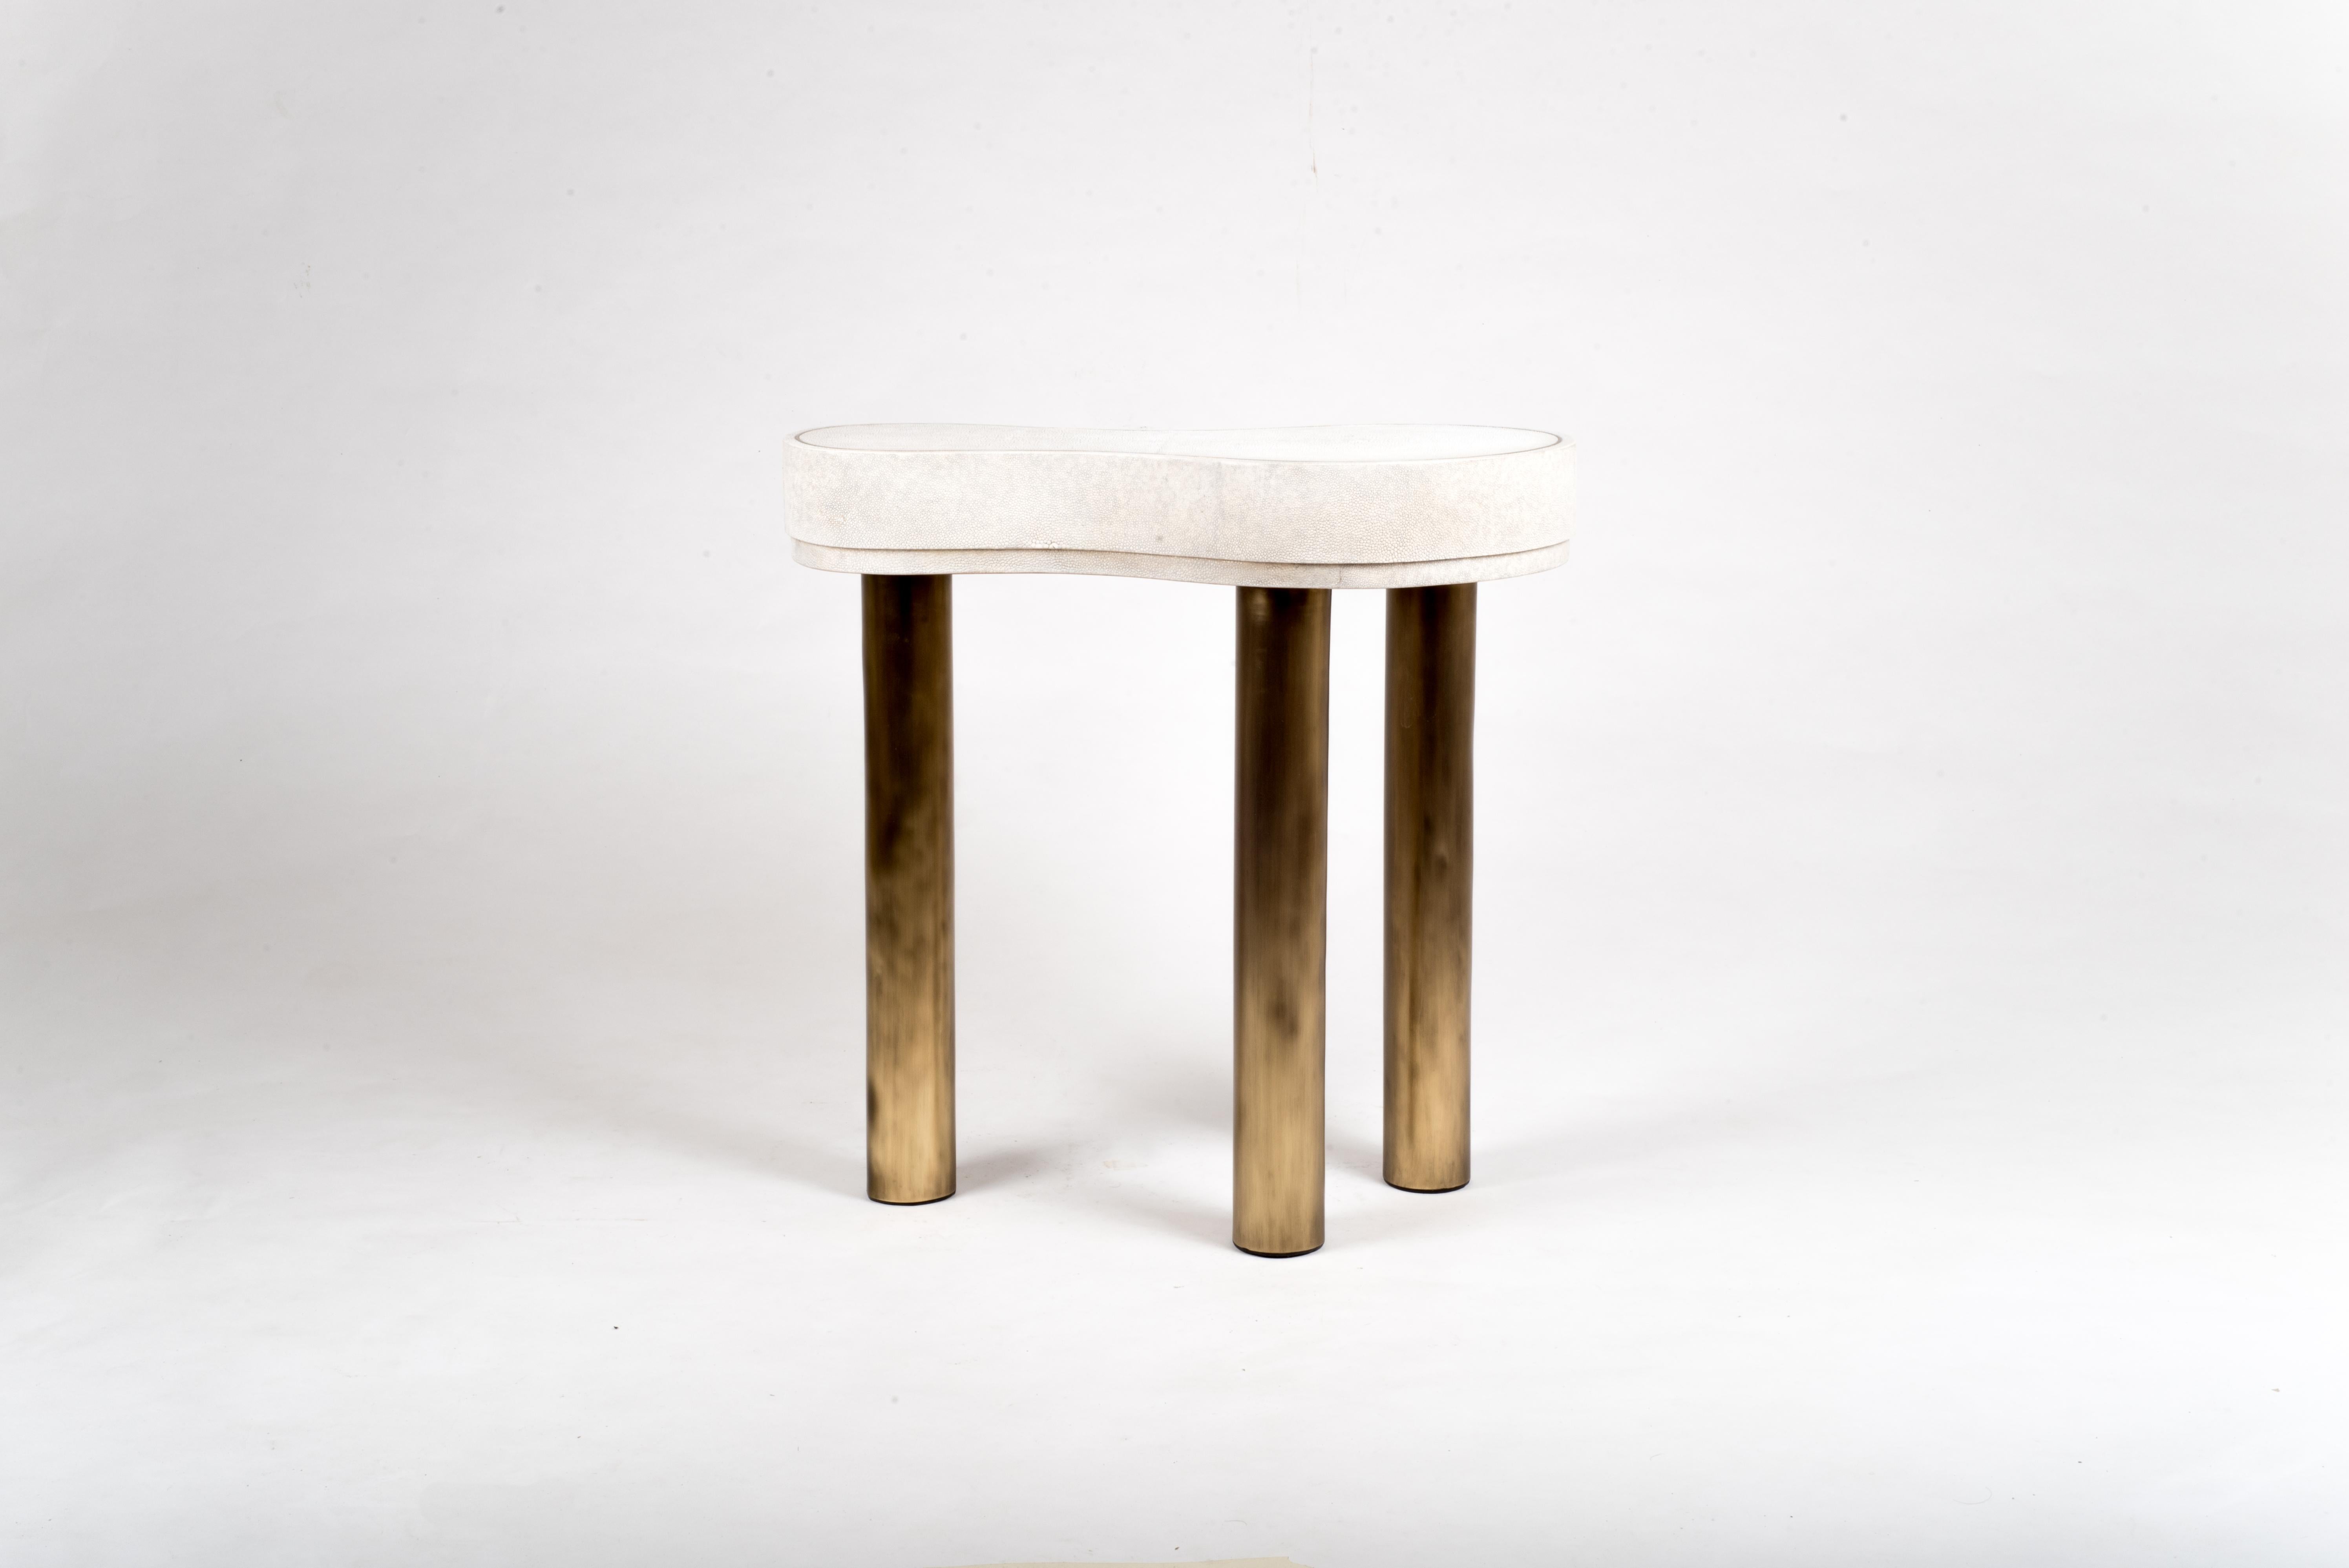 The constellation side table is whimsical and elegant with its amorphous shape. The shagreen is hand-dyed by artisans and the designer calls the final finish “Antique Natural” shagreen. The piece has beautiful discreet details of a metal indentation